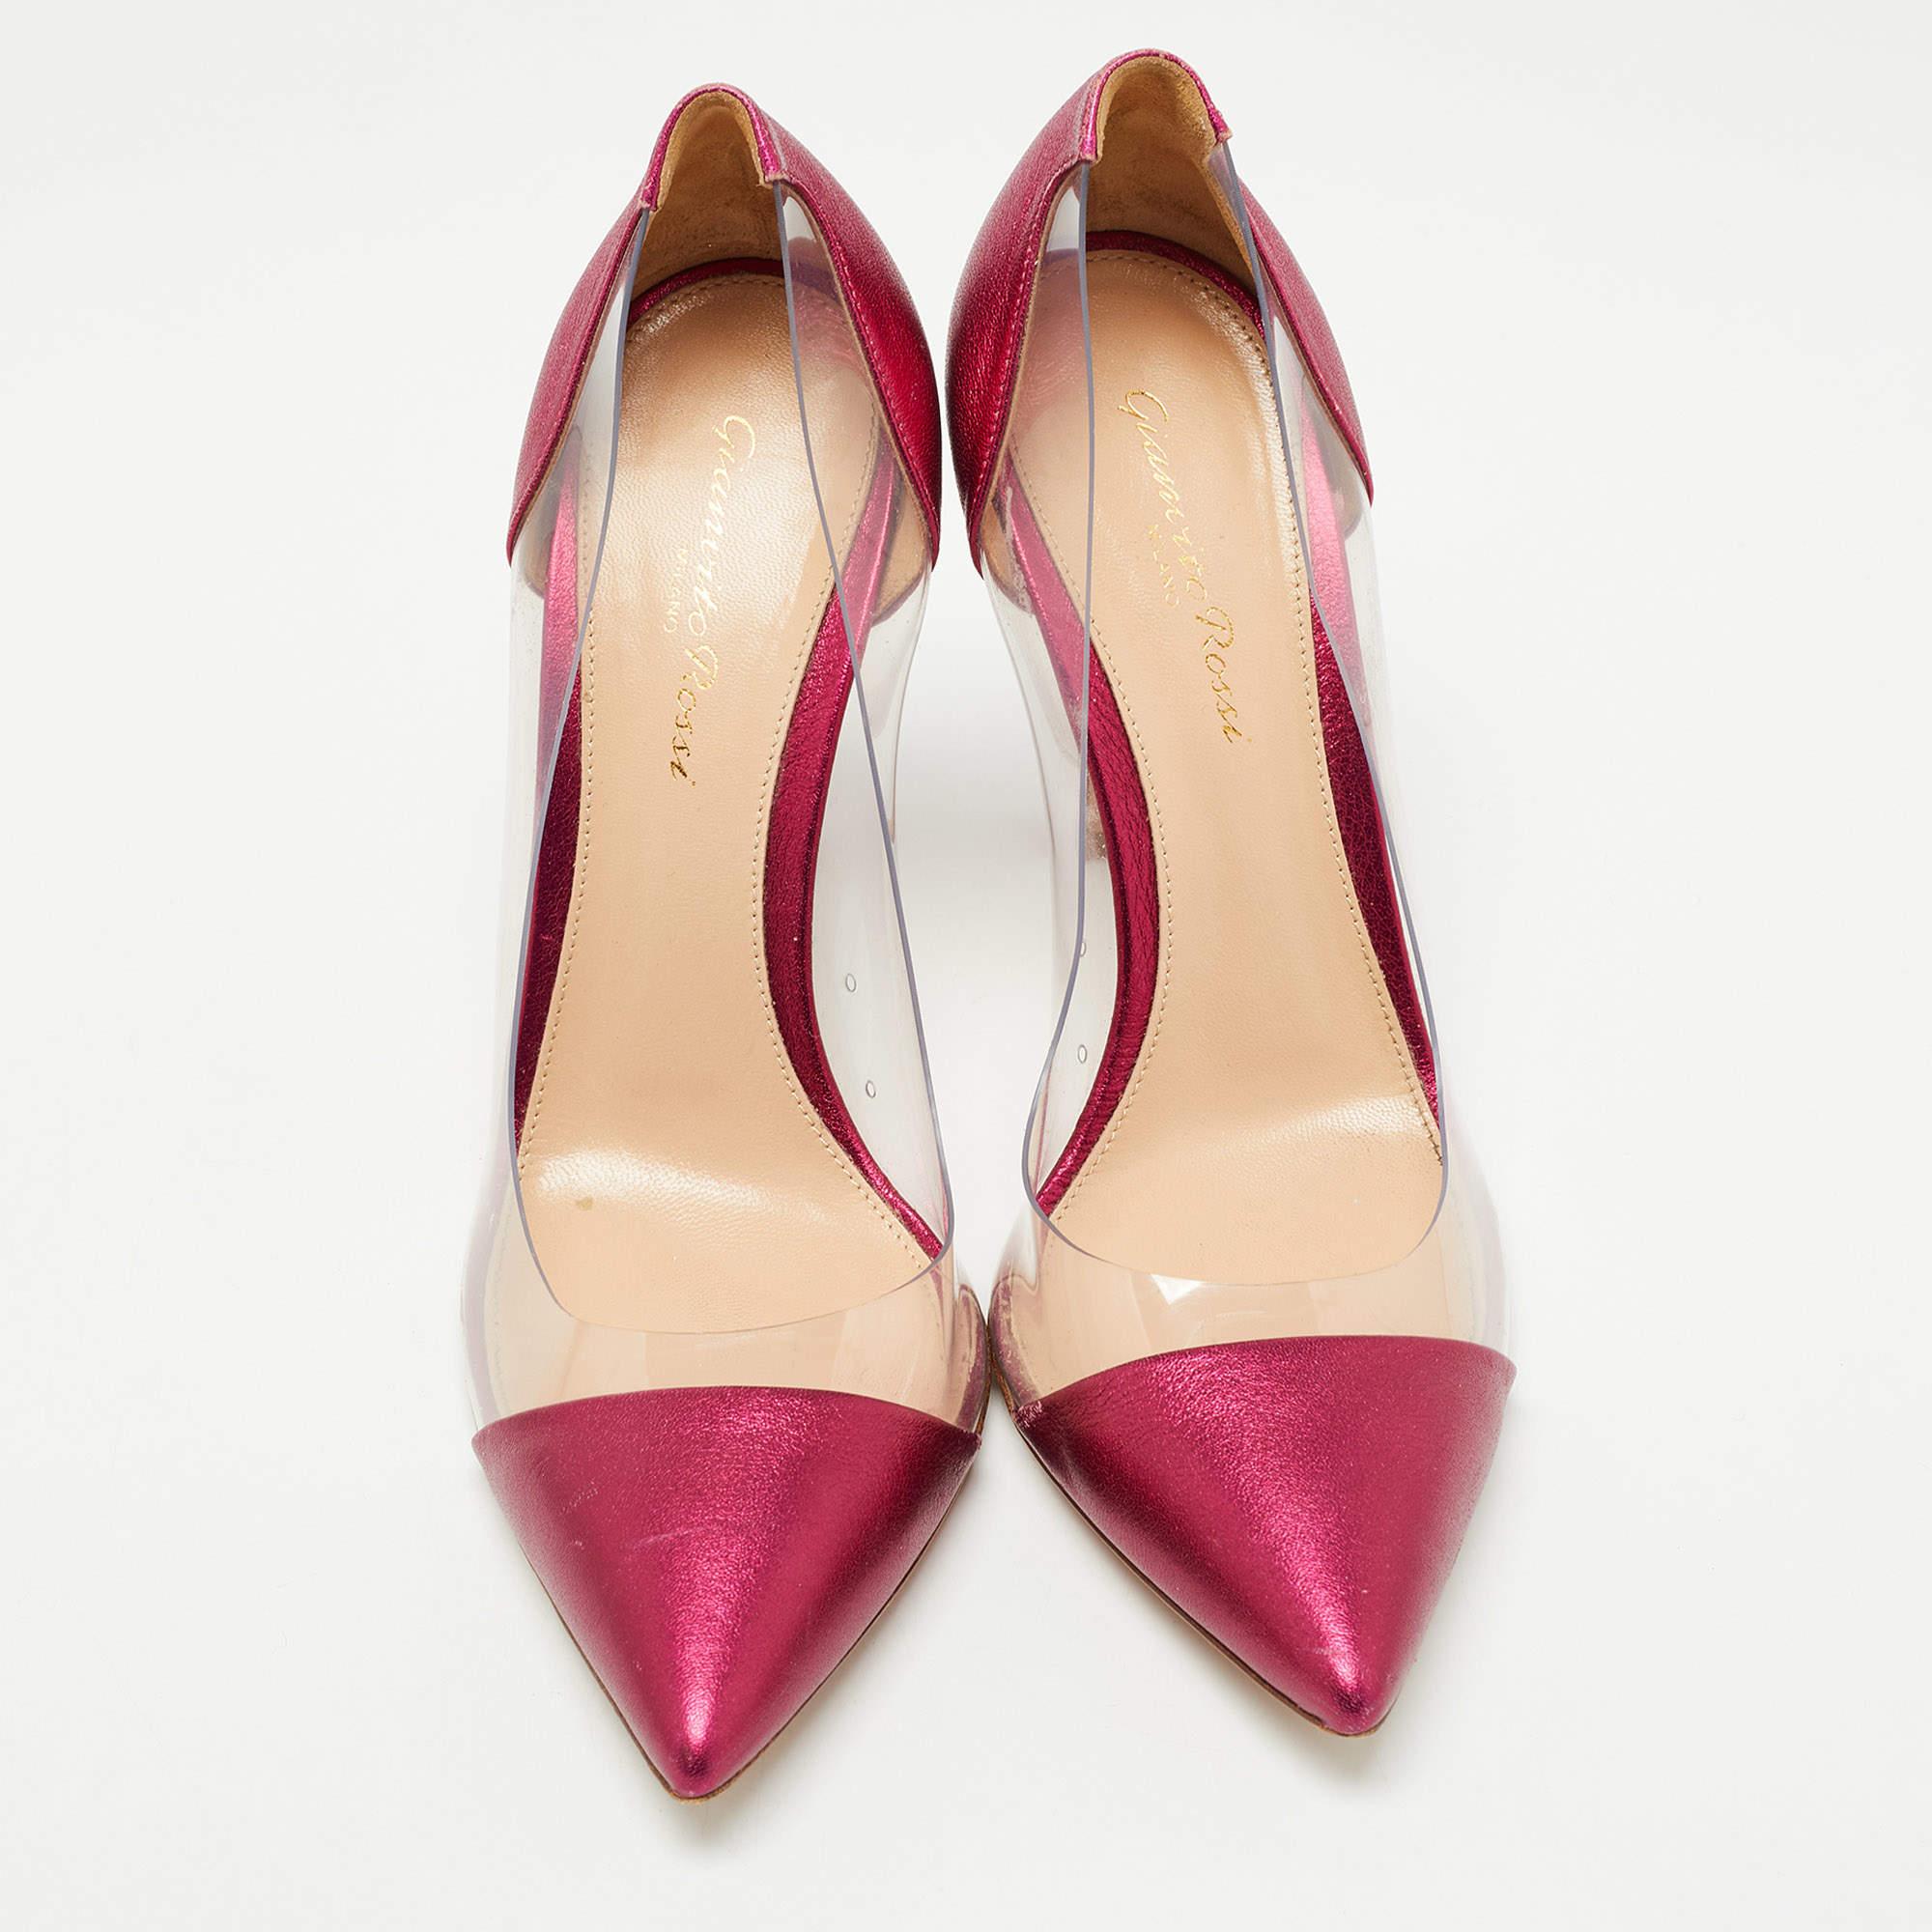 Exhibit an elegant style with this pair of pumps. These Gianvito Rossi shoes for women are crafted from quality materials. They are set on durable soles and sleek heels.

